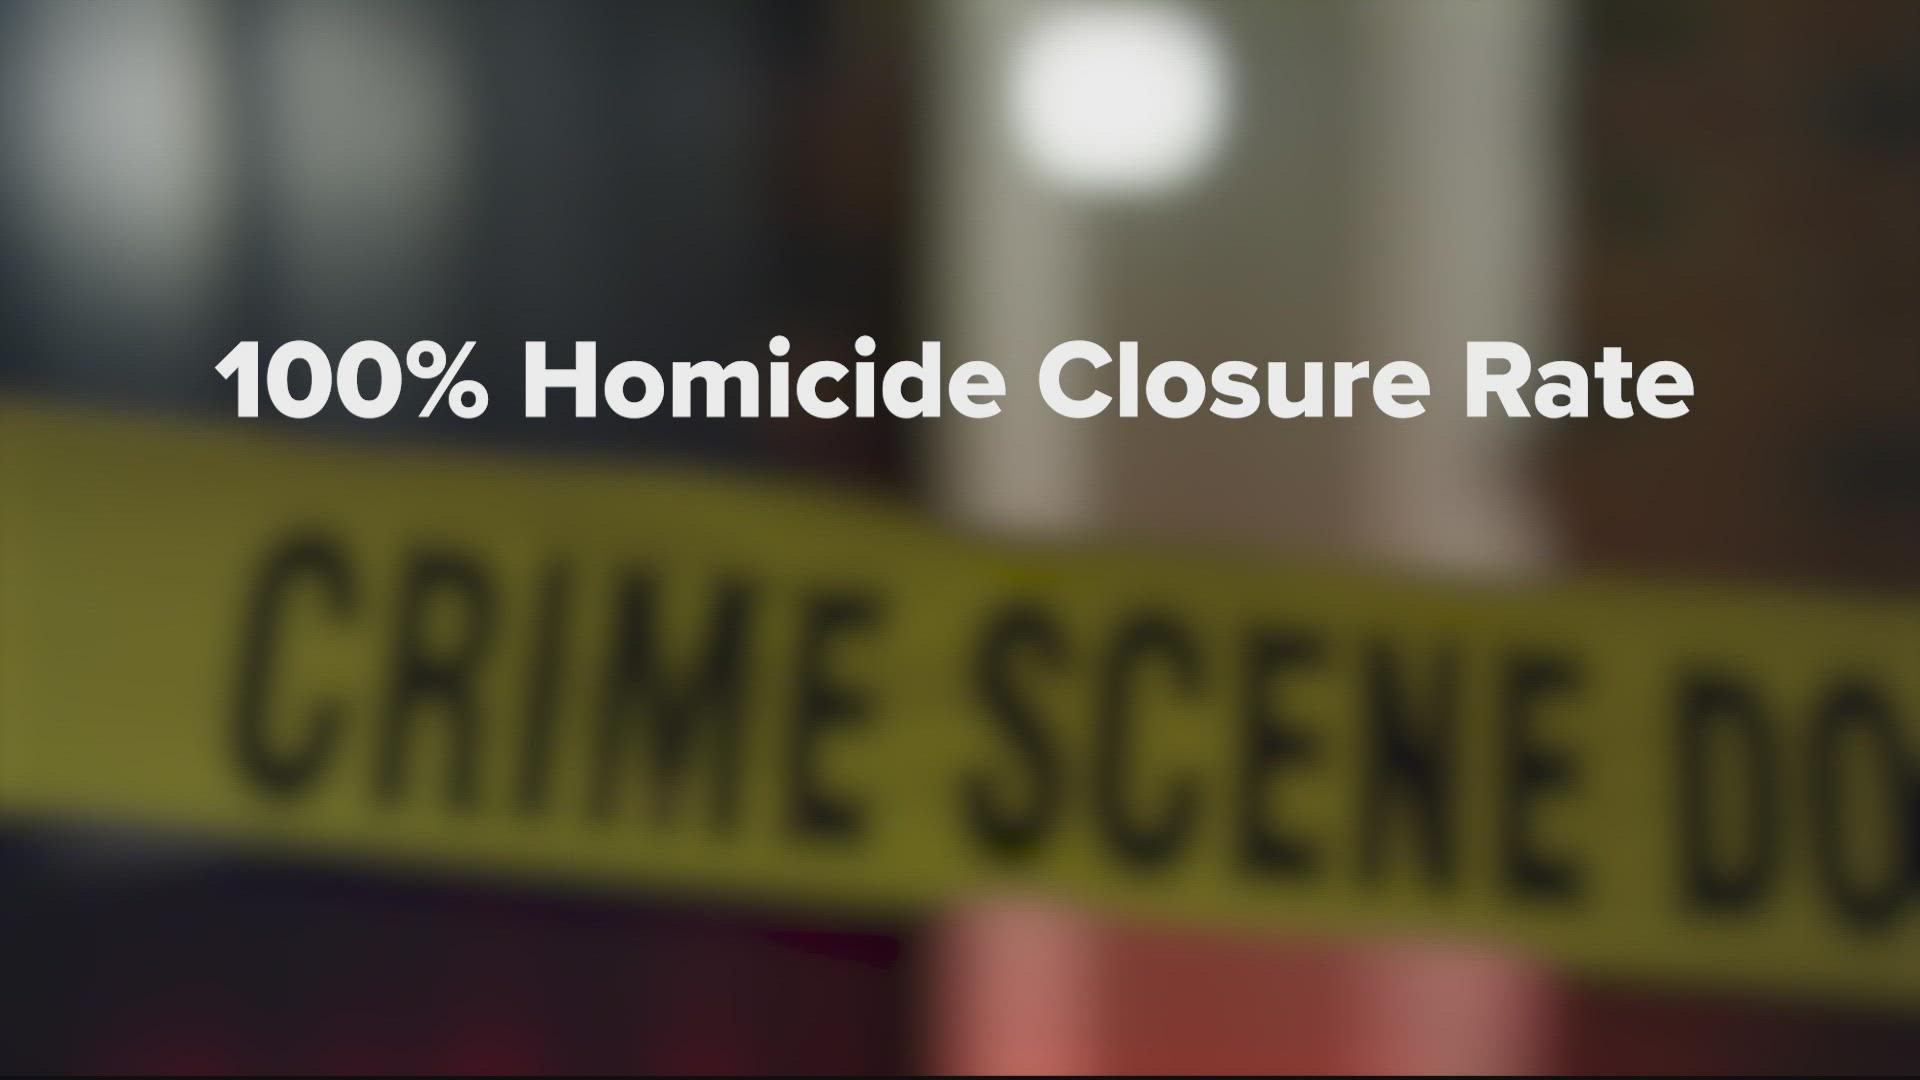 Montgomery County Police say they have closed every murder case in the county. Which our Casey Nolen reports is far from typical and nothing like the national trends